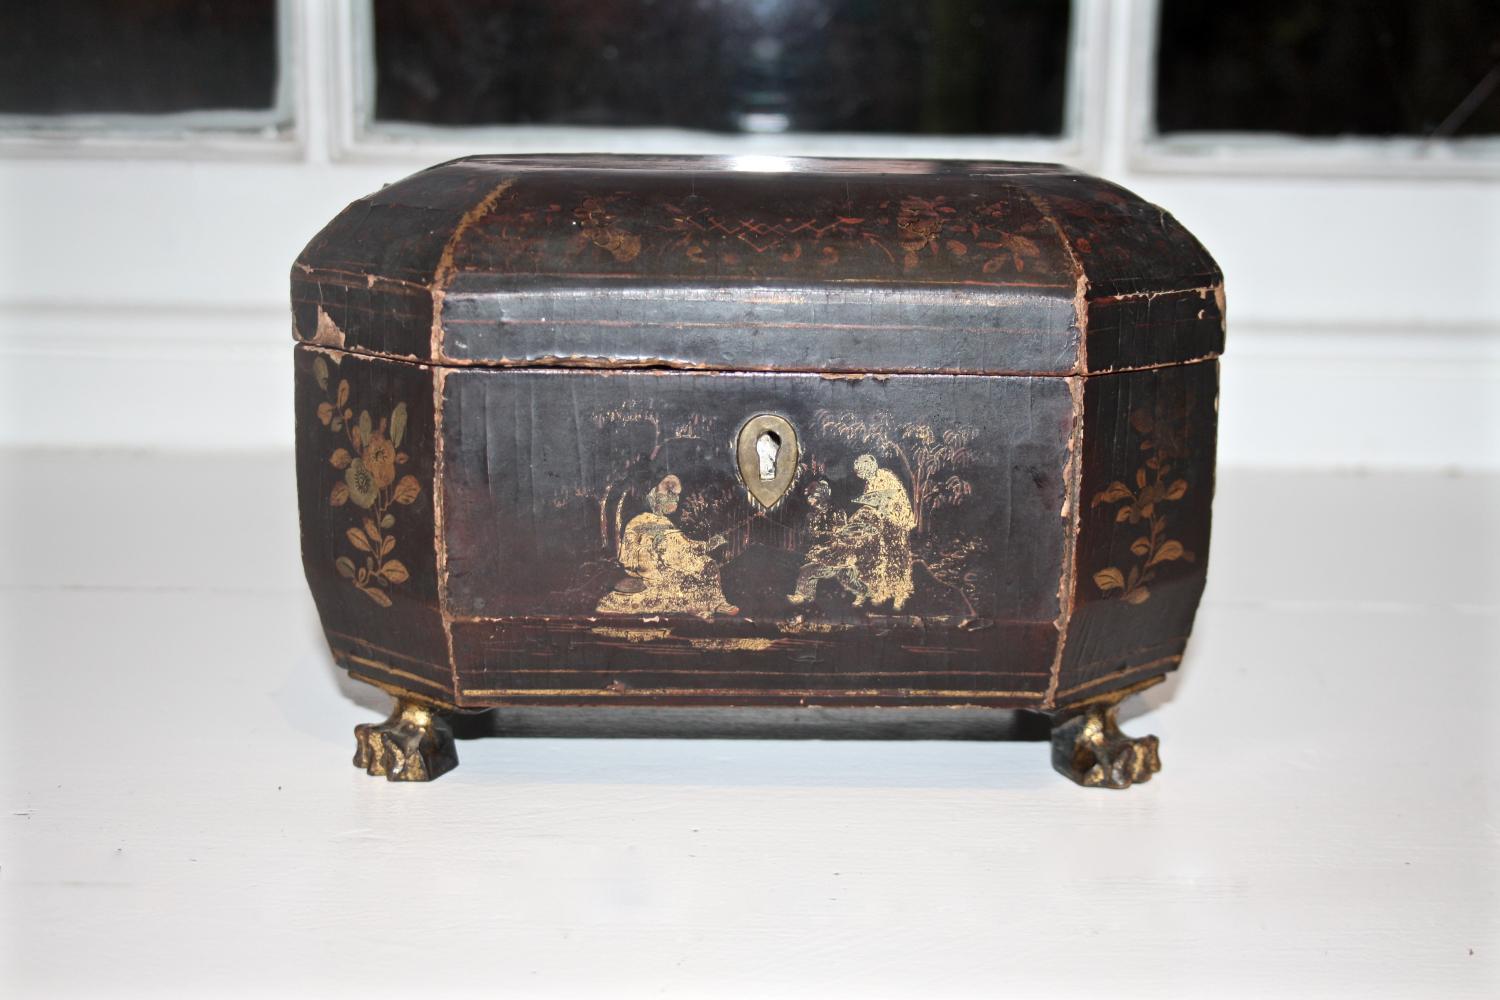 19th century Chinese lacquer tea caddy